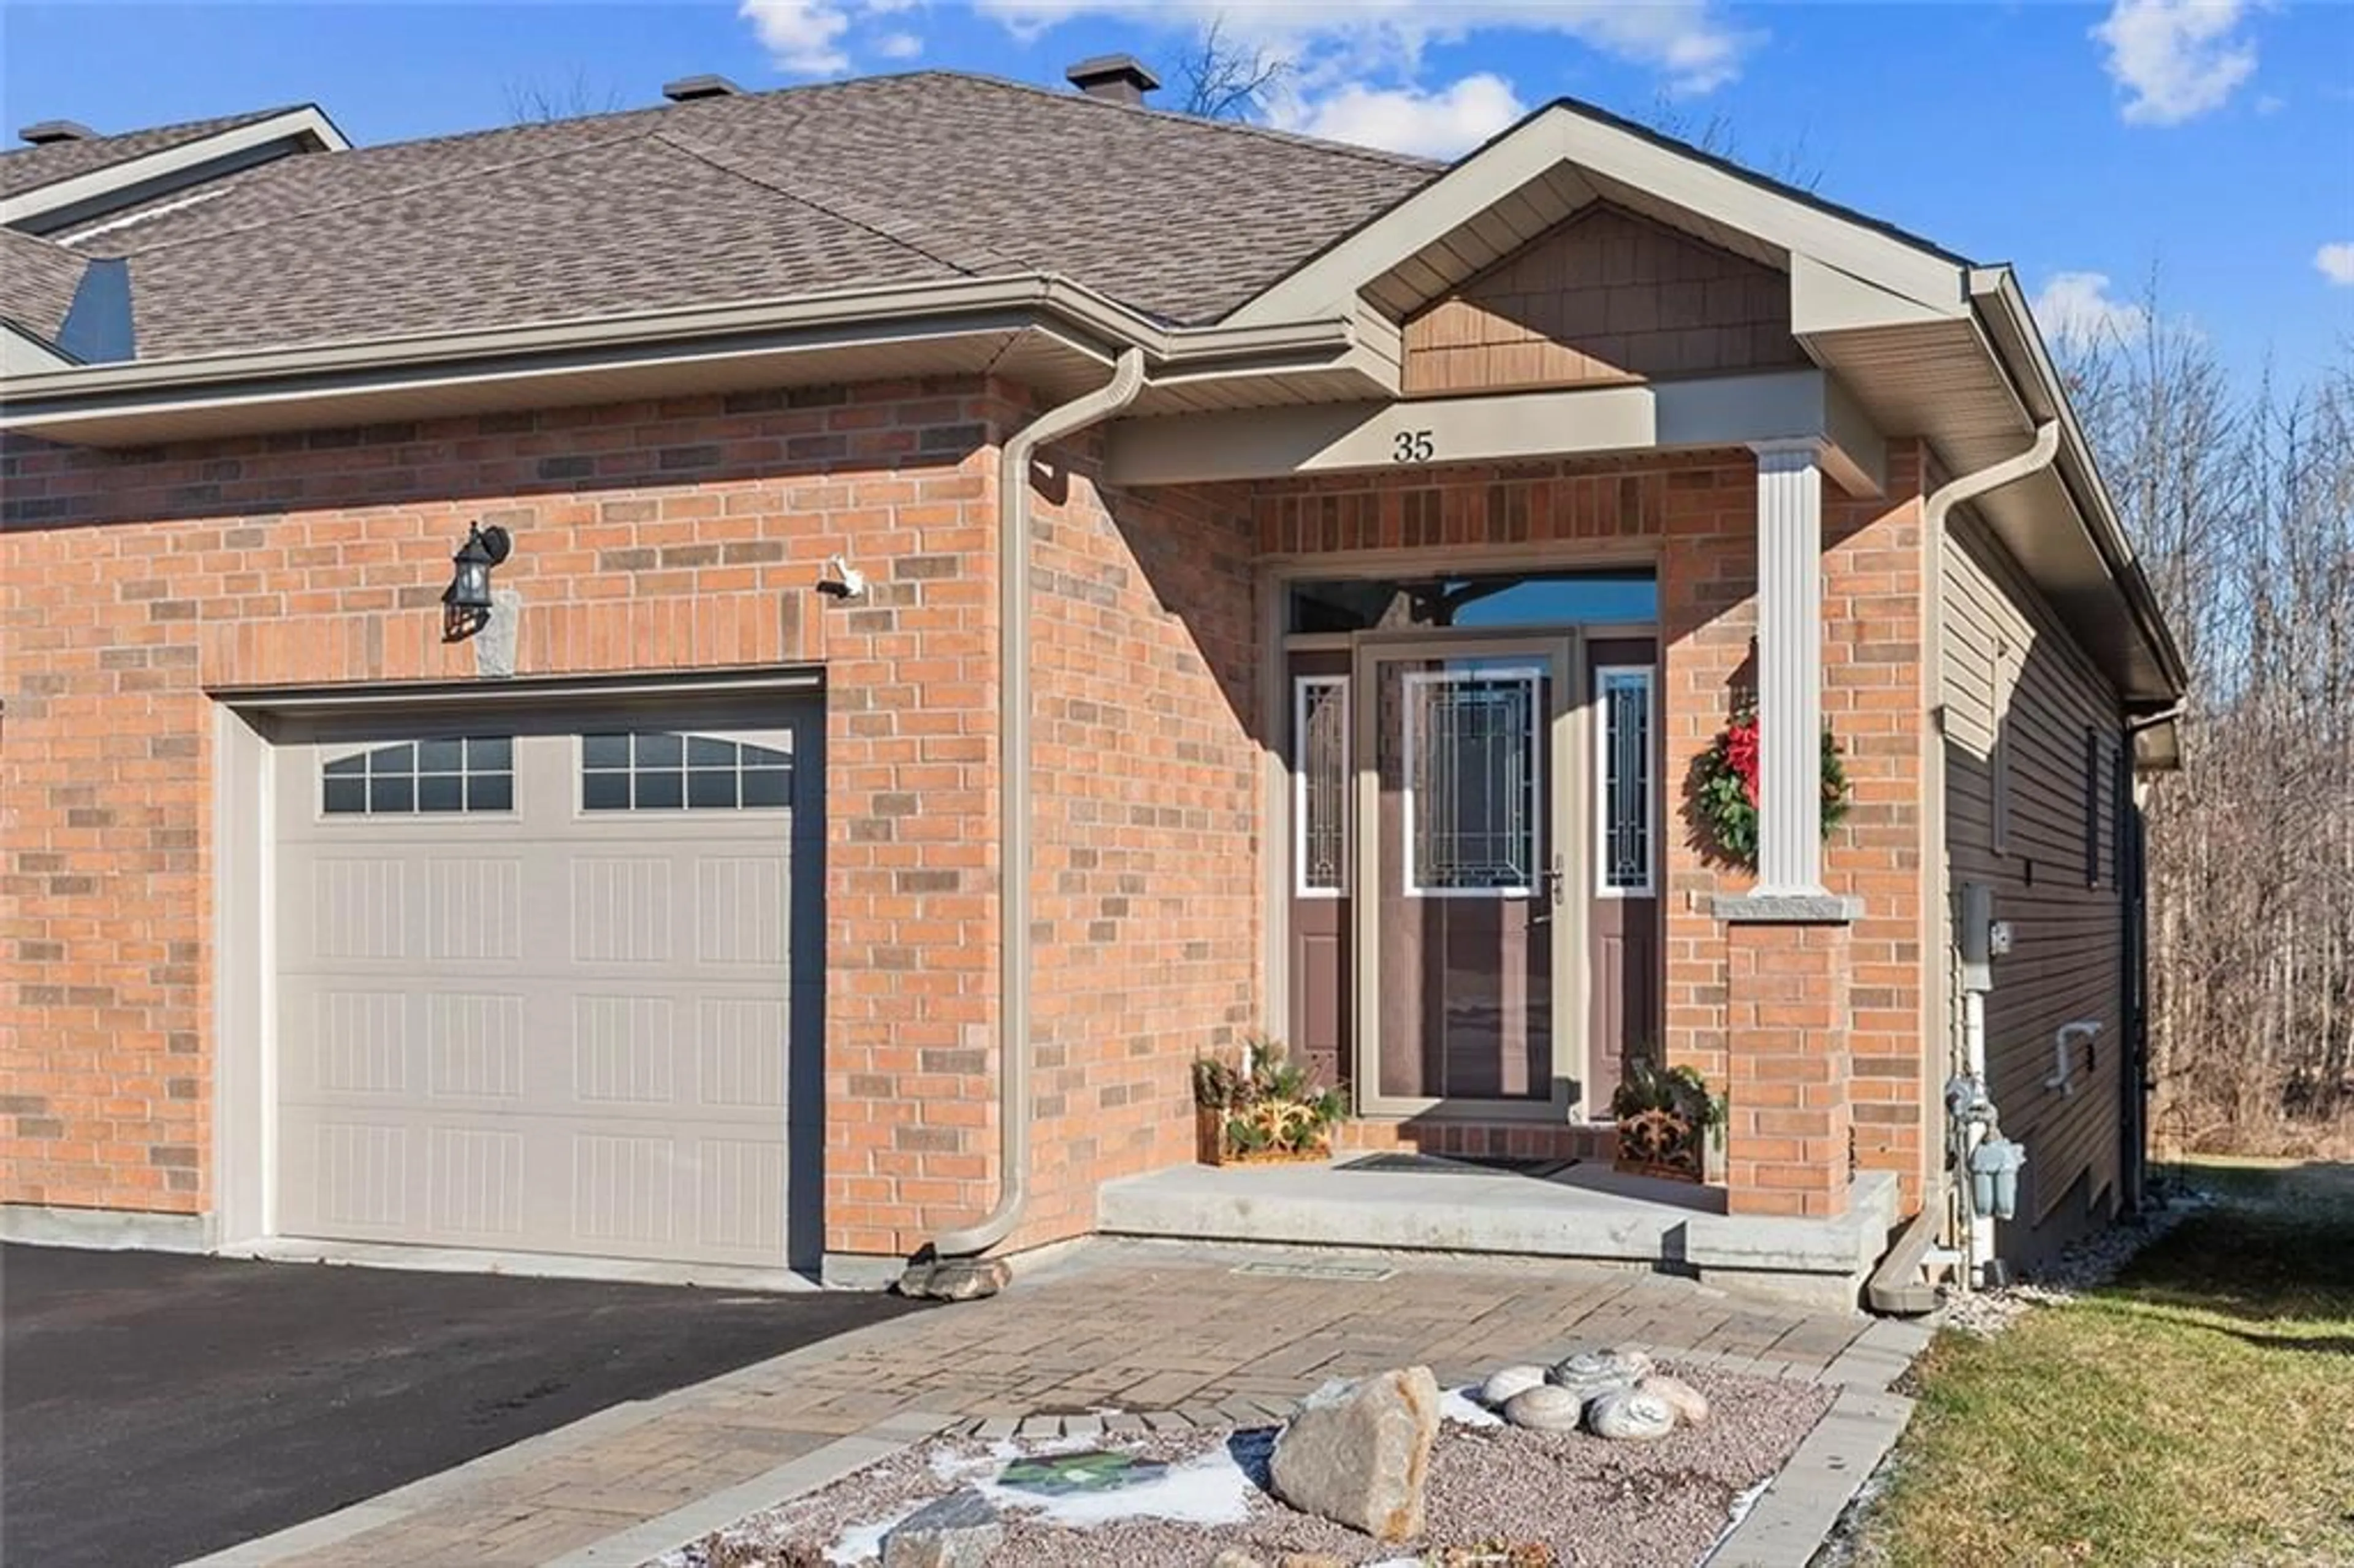 Home with brick exterior material for 35 Perthmore St, Perth Ontario K7H 3P1